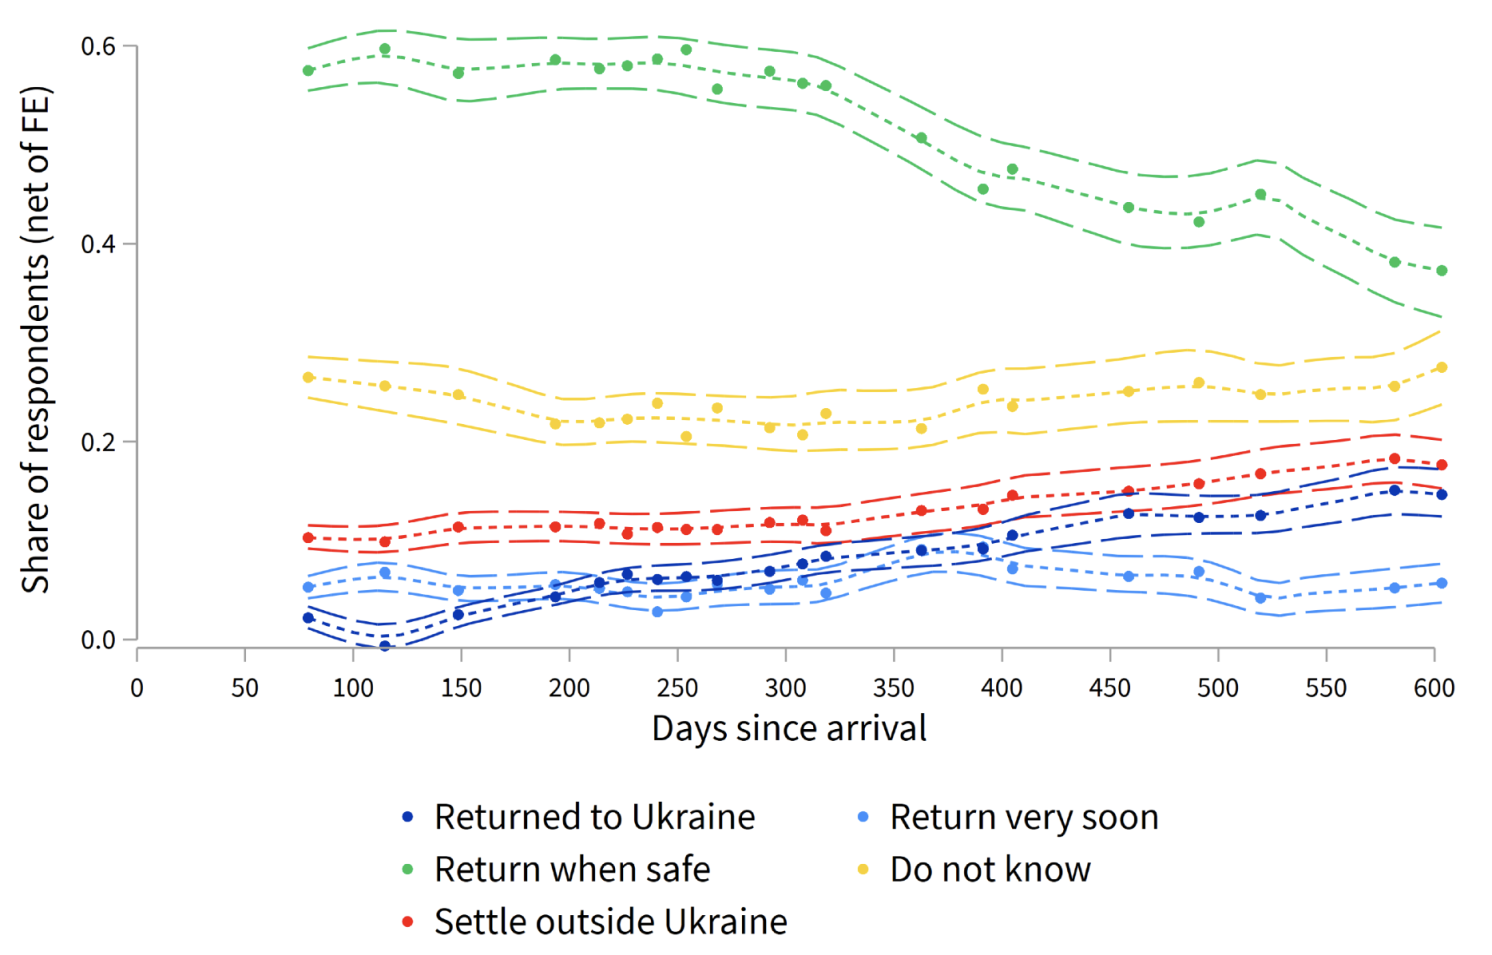 Figure 1 Within-individual return intentions and return over time since arrival